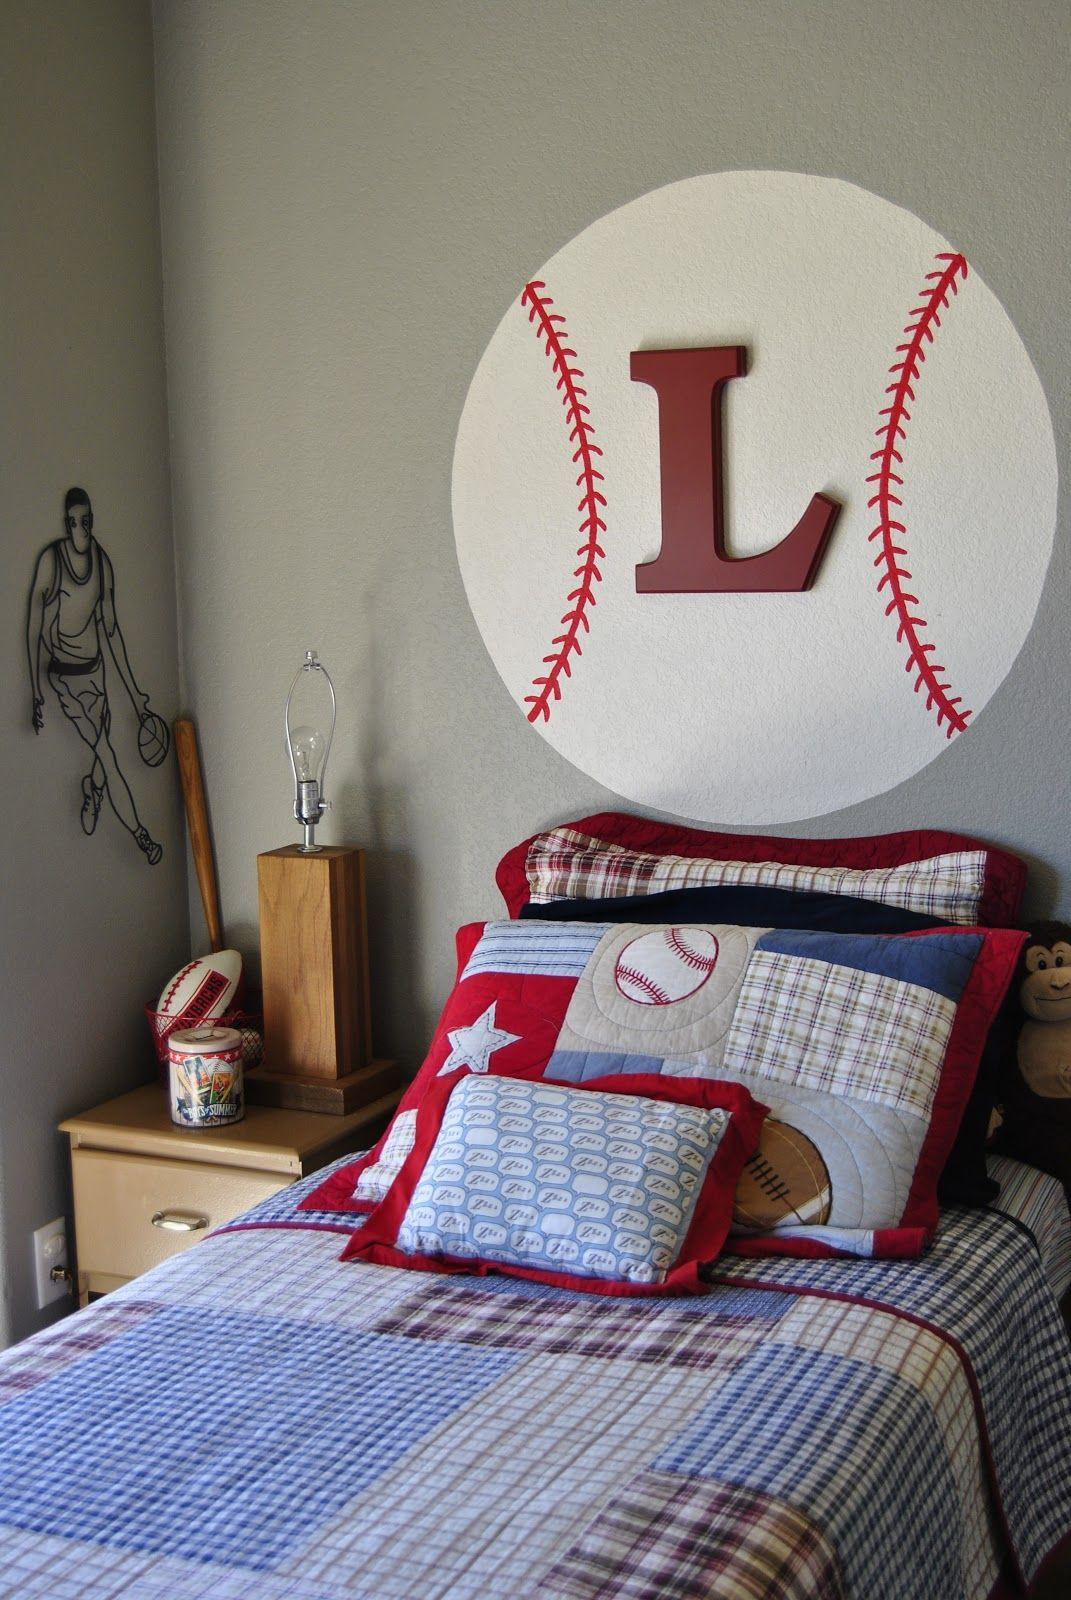 Kids Sports Room Decor
 45 Best Boys Bedrooms Designs Ideas and Decor Inspiration